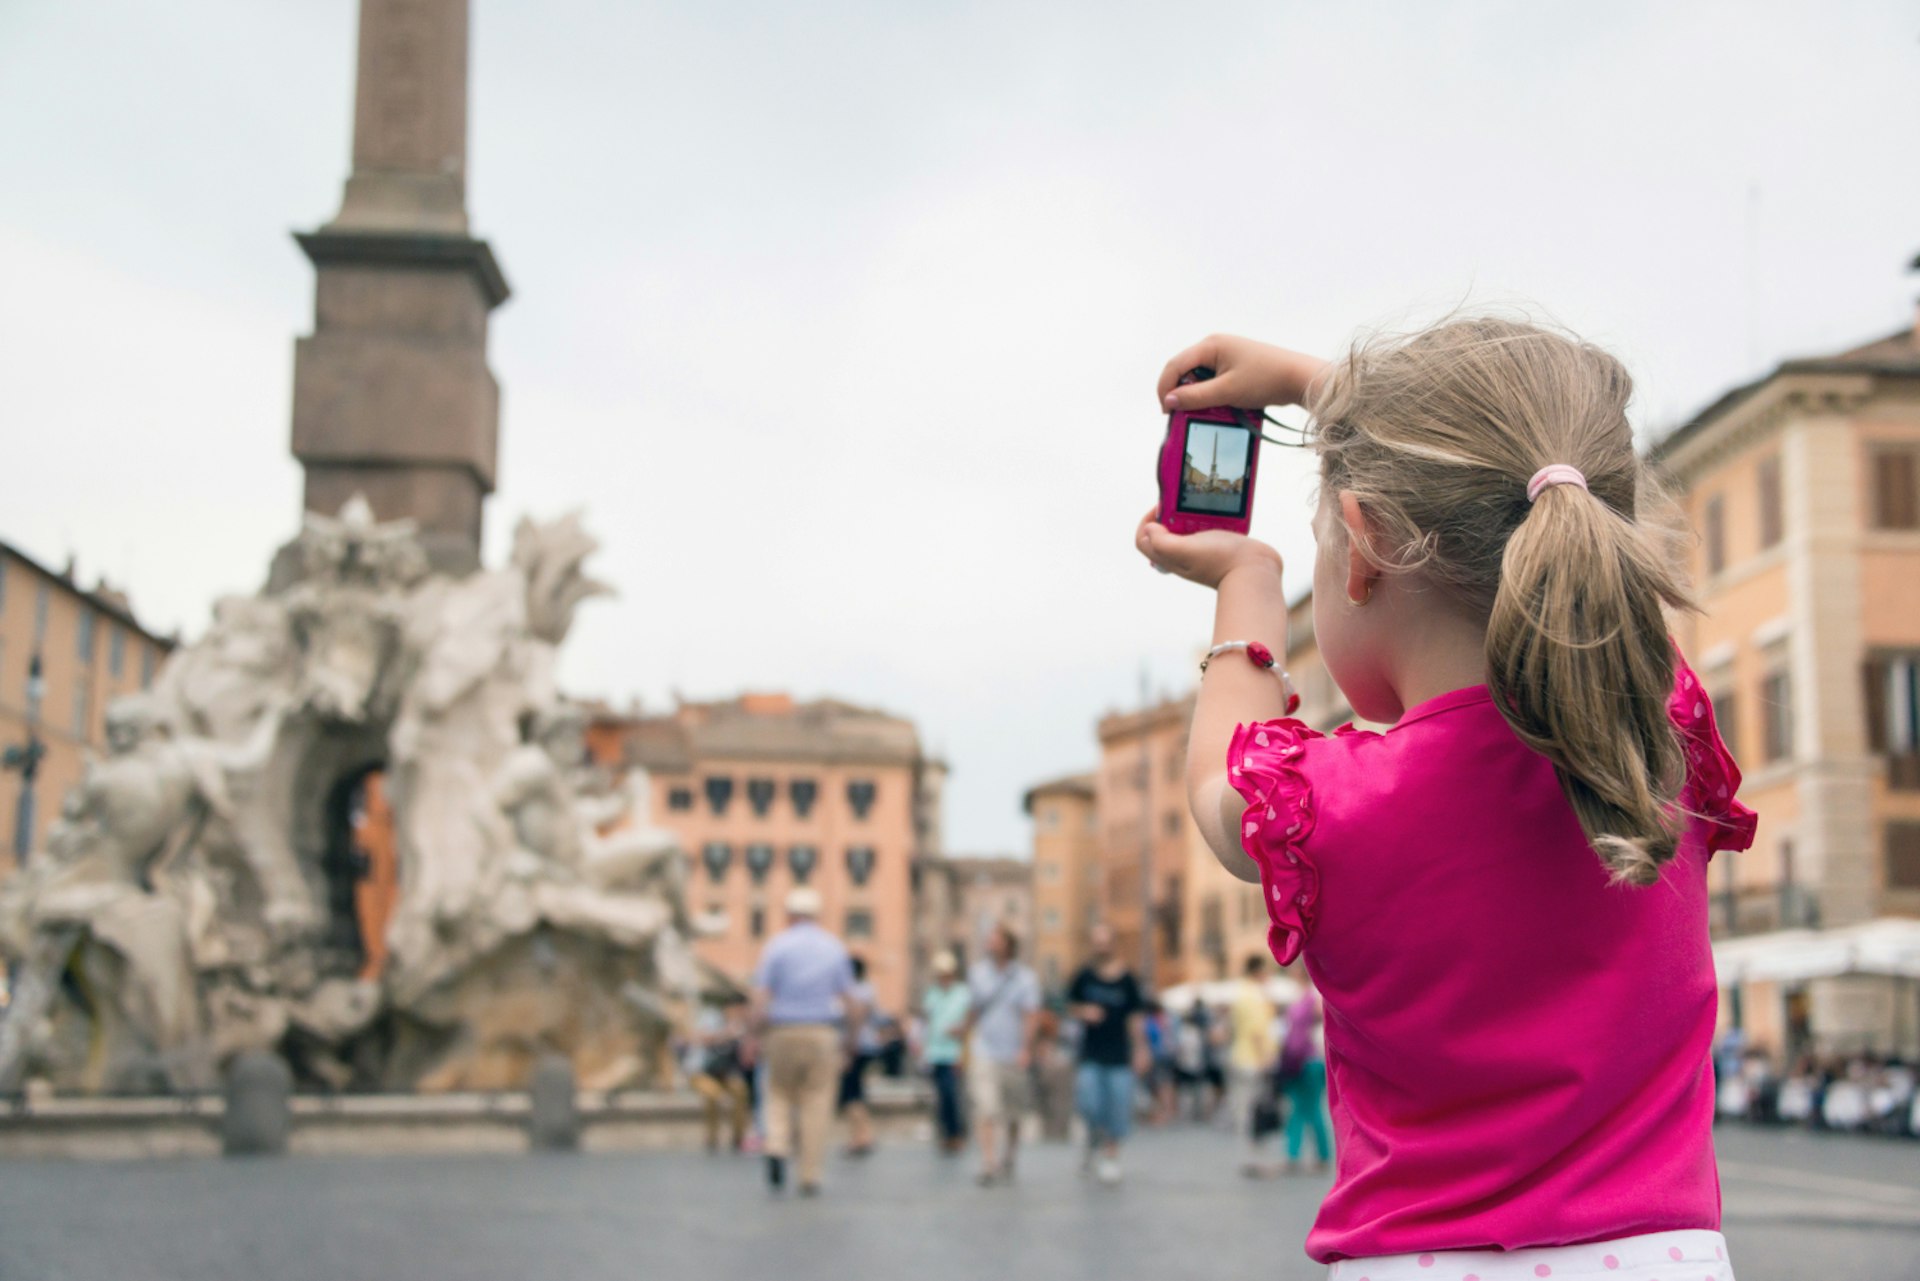 Sightseeing in Piazza Navona. Image by Stefan Cioata / Moment Open / Getty